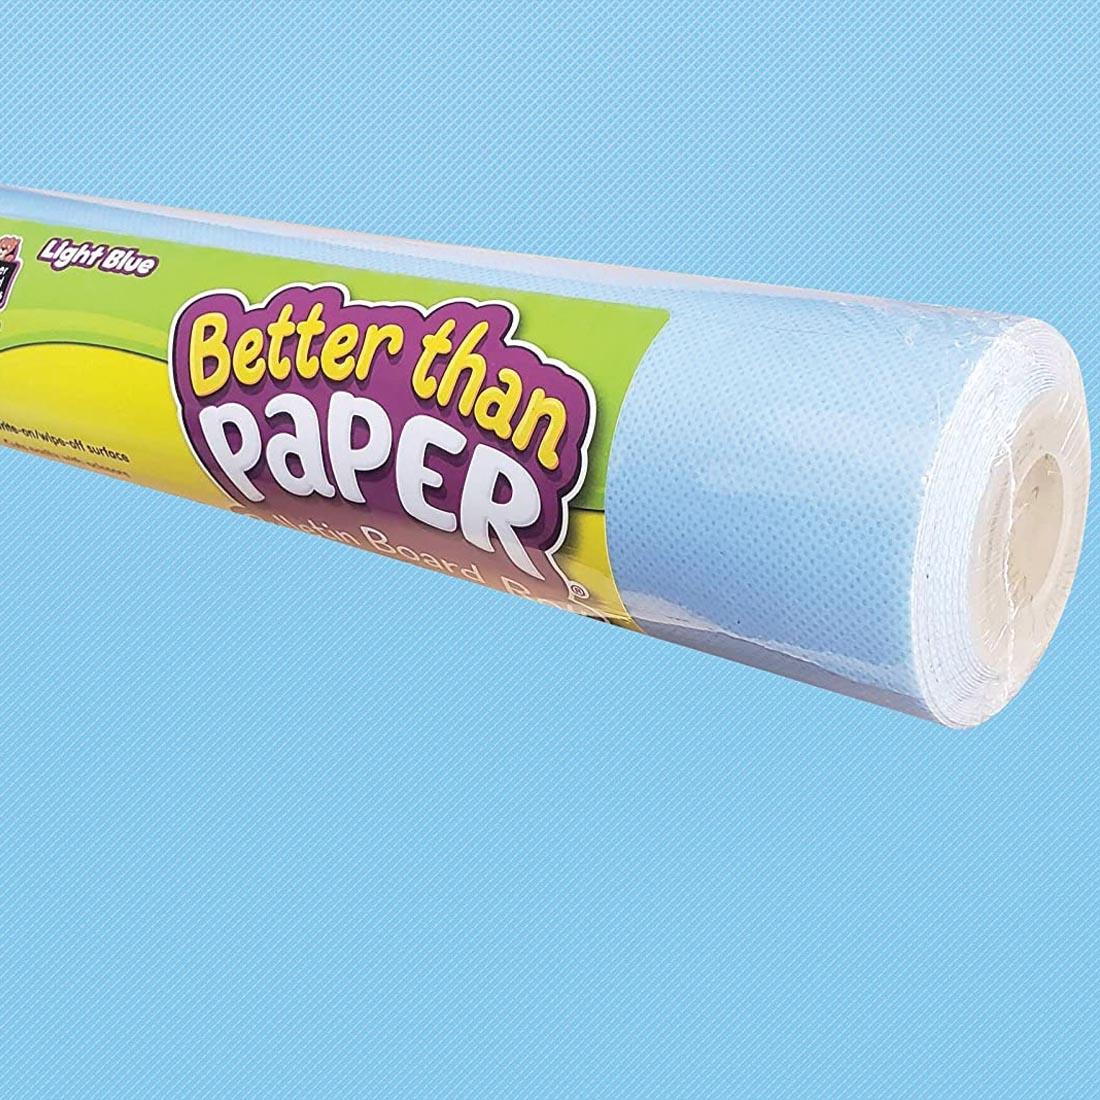 Light Blue Better Than Paper Bulletin Board Roll with it shown in use in the background